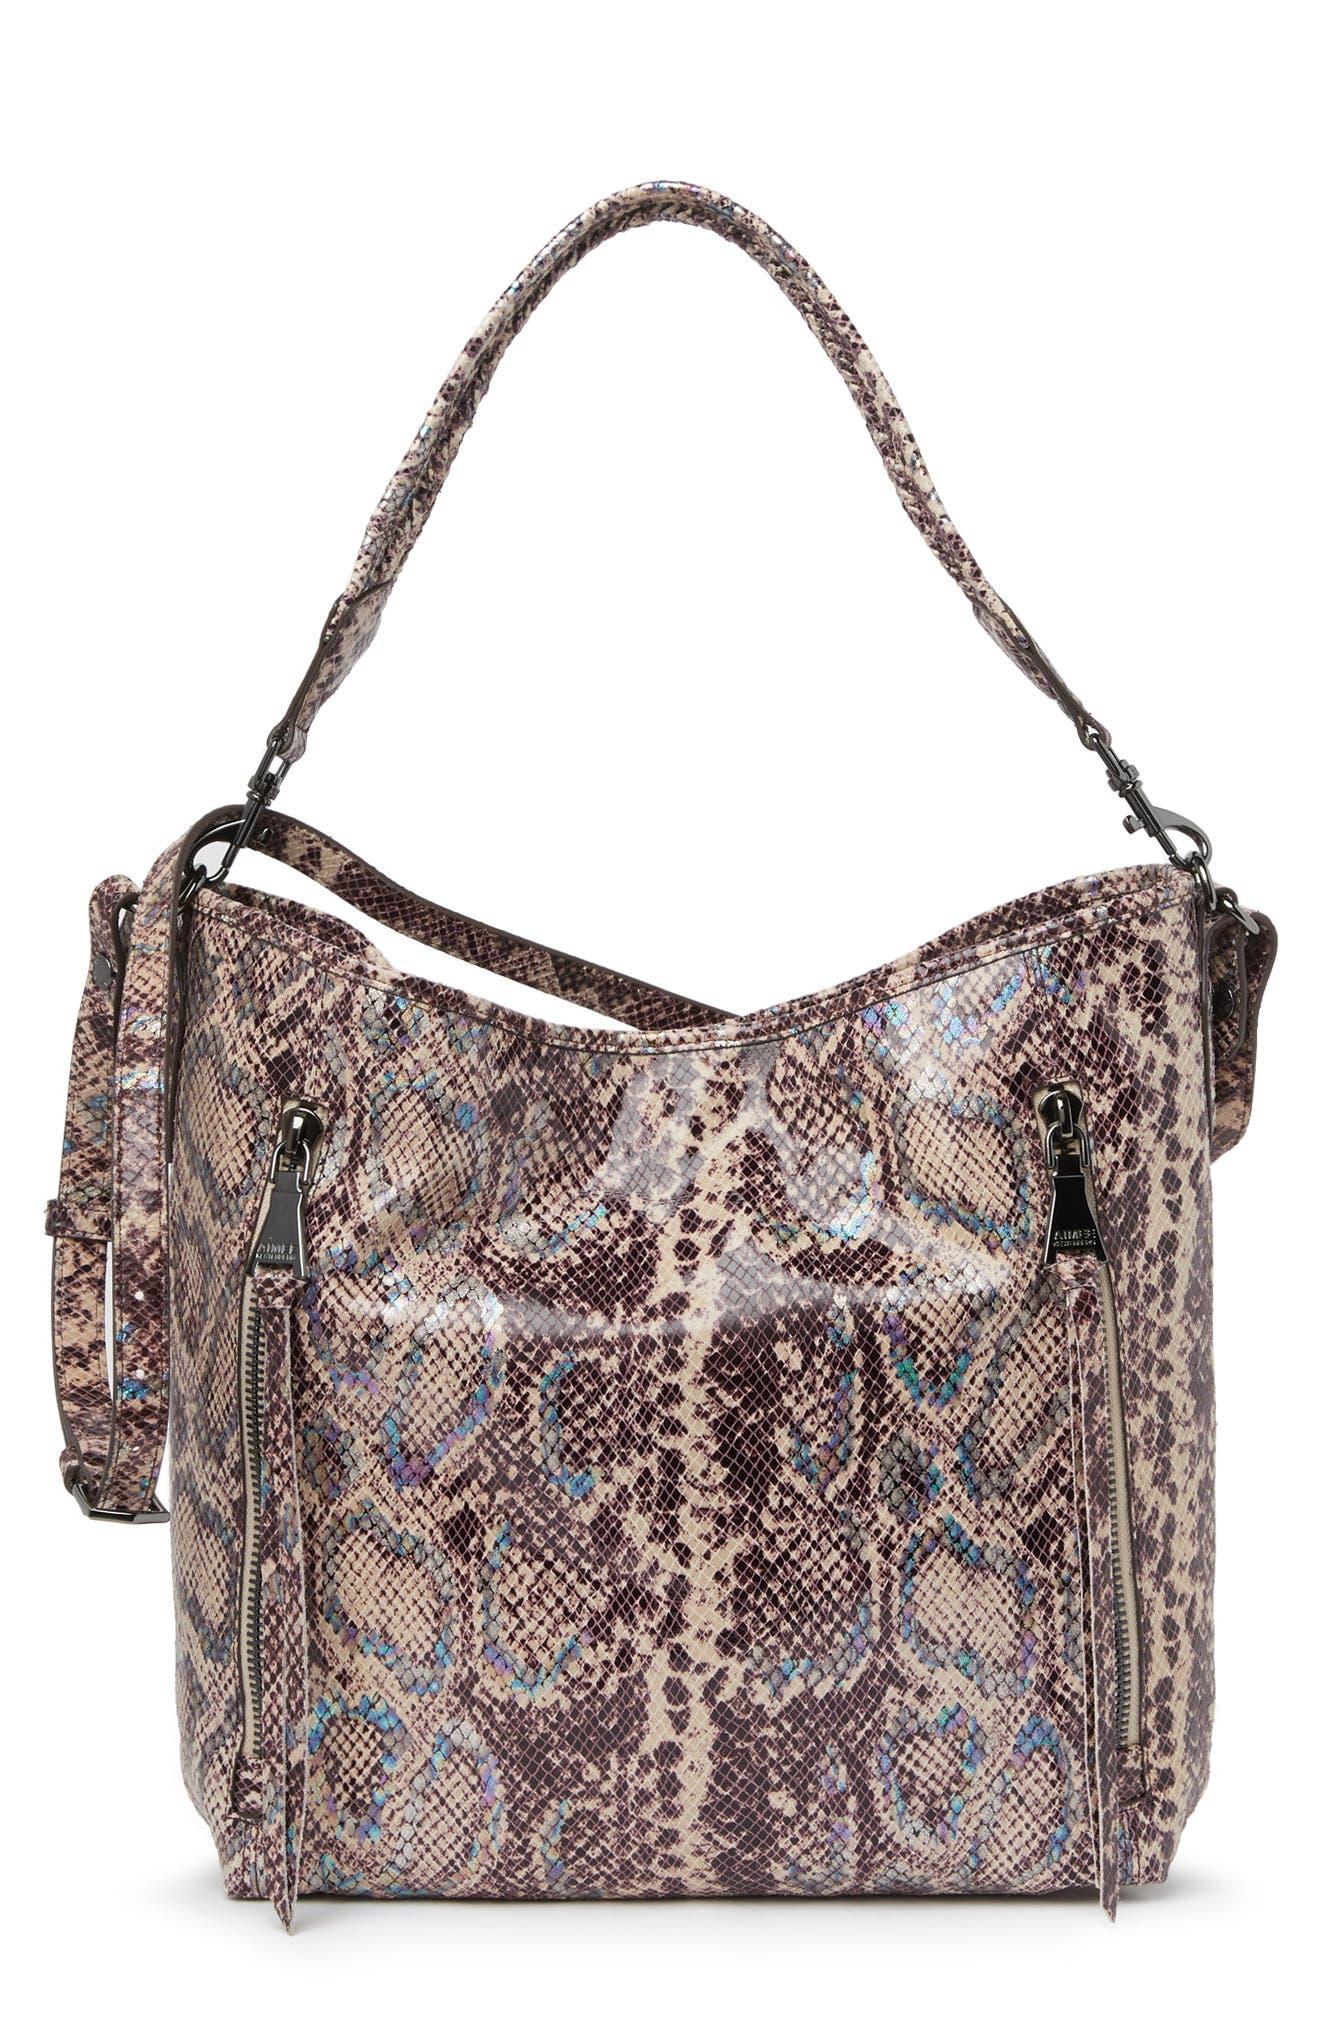 Buy Beige Snakeskin Print Bag by The Purple Sack Online at Aza Fashions.